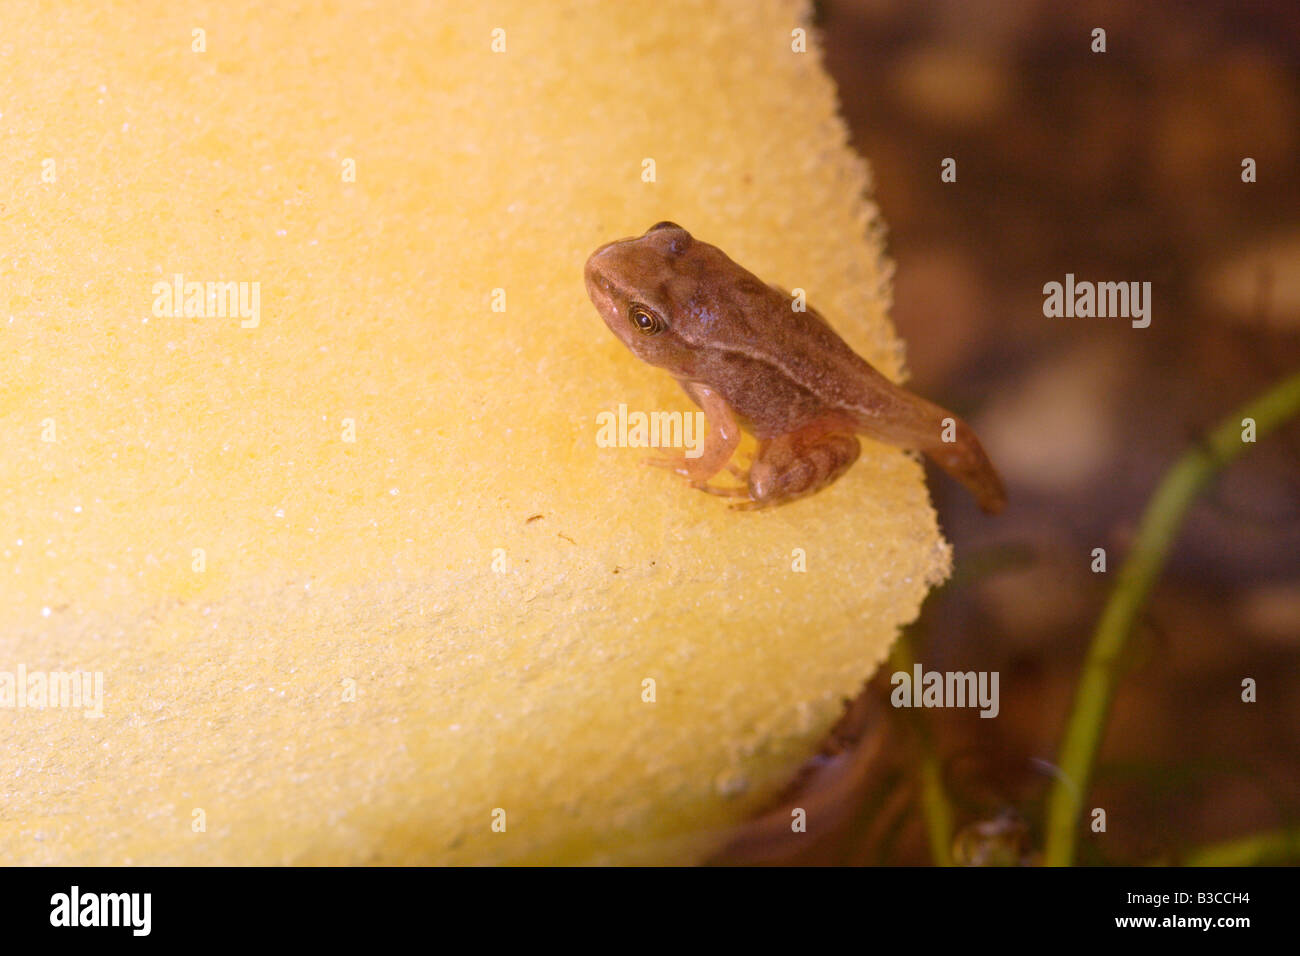 Common froglet still with tail, emerging from water onto a sponge, UK Stock Photo